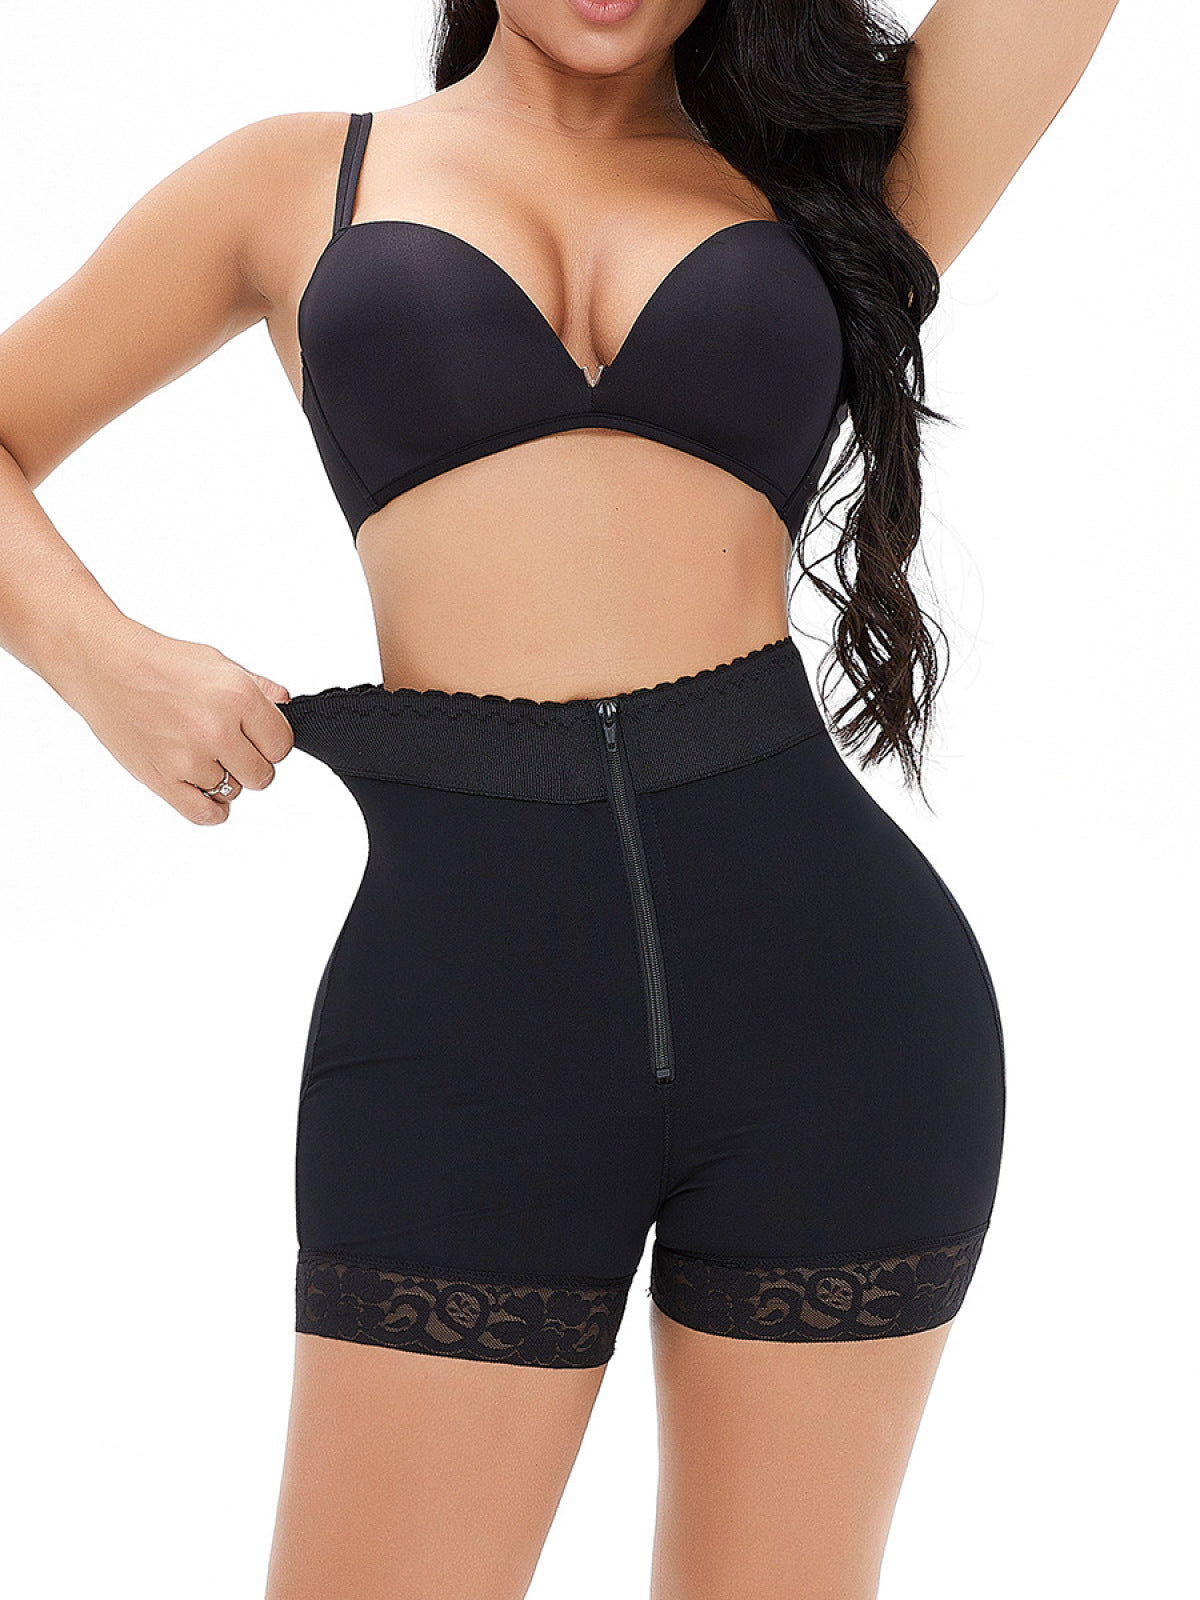 Plus Size Waist Trainer Seamless Butt Lifting Shorts | Art in Aging